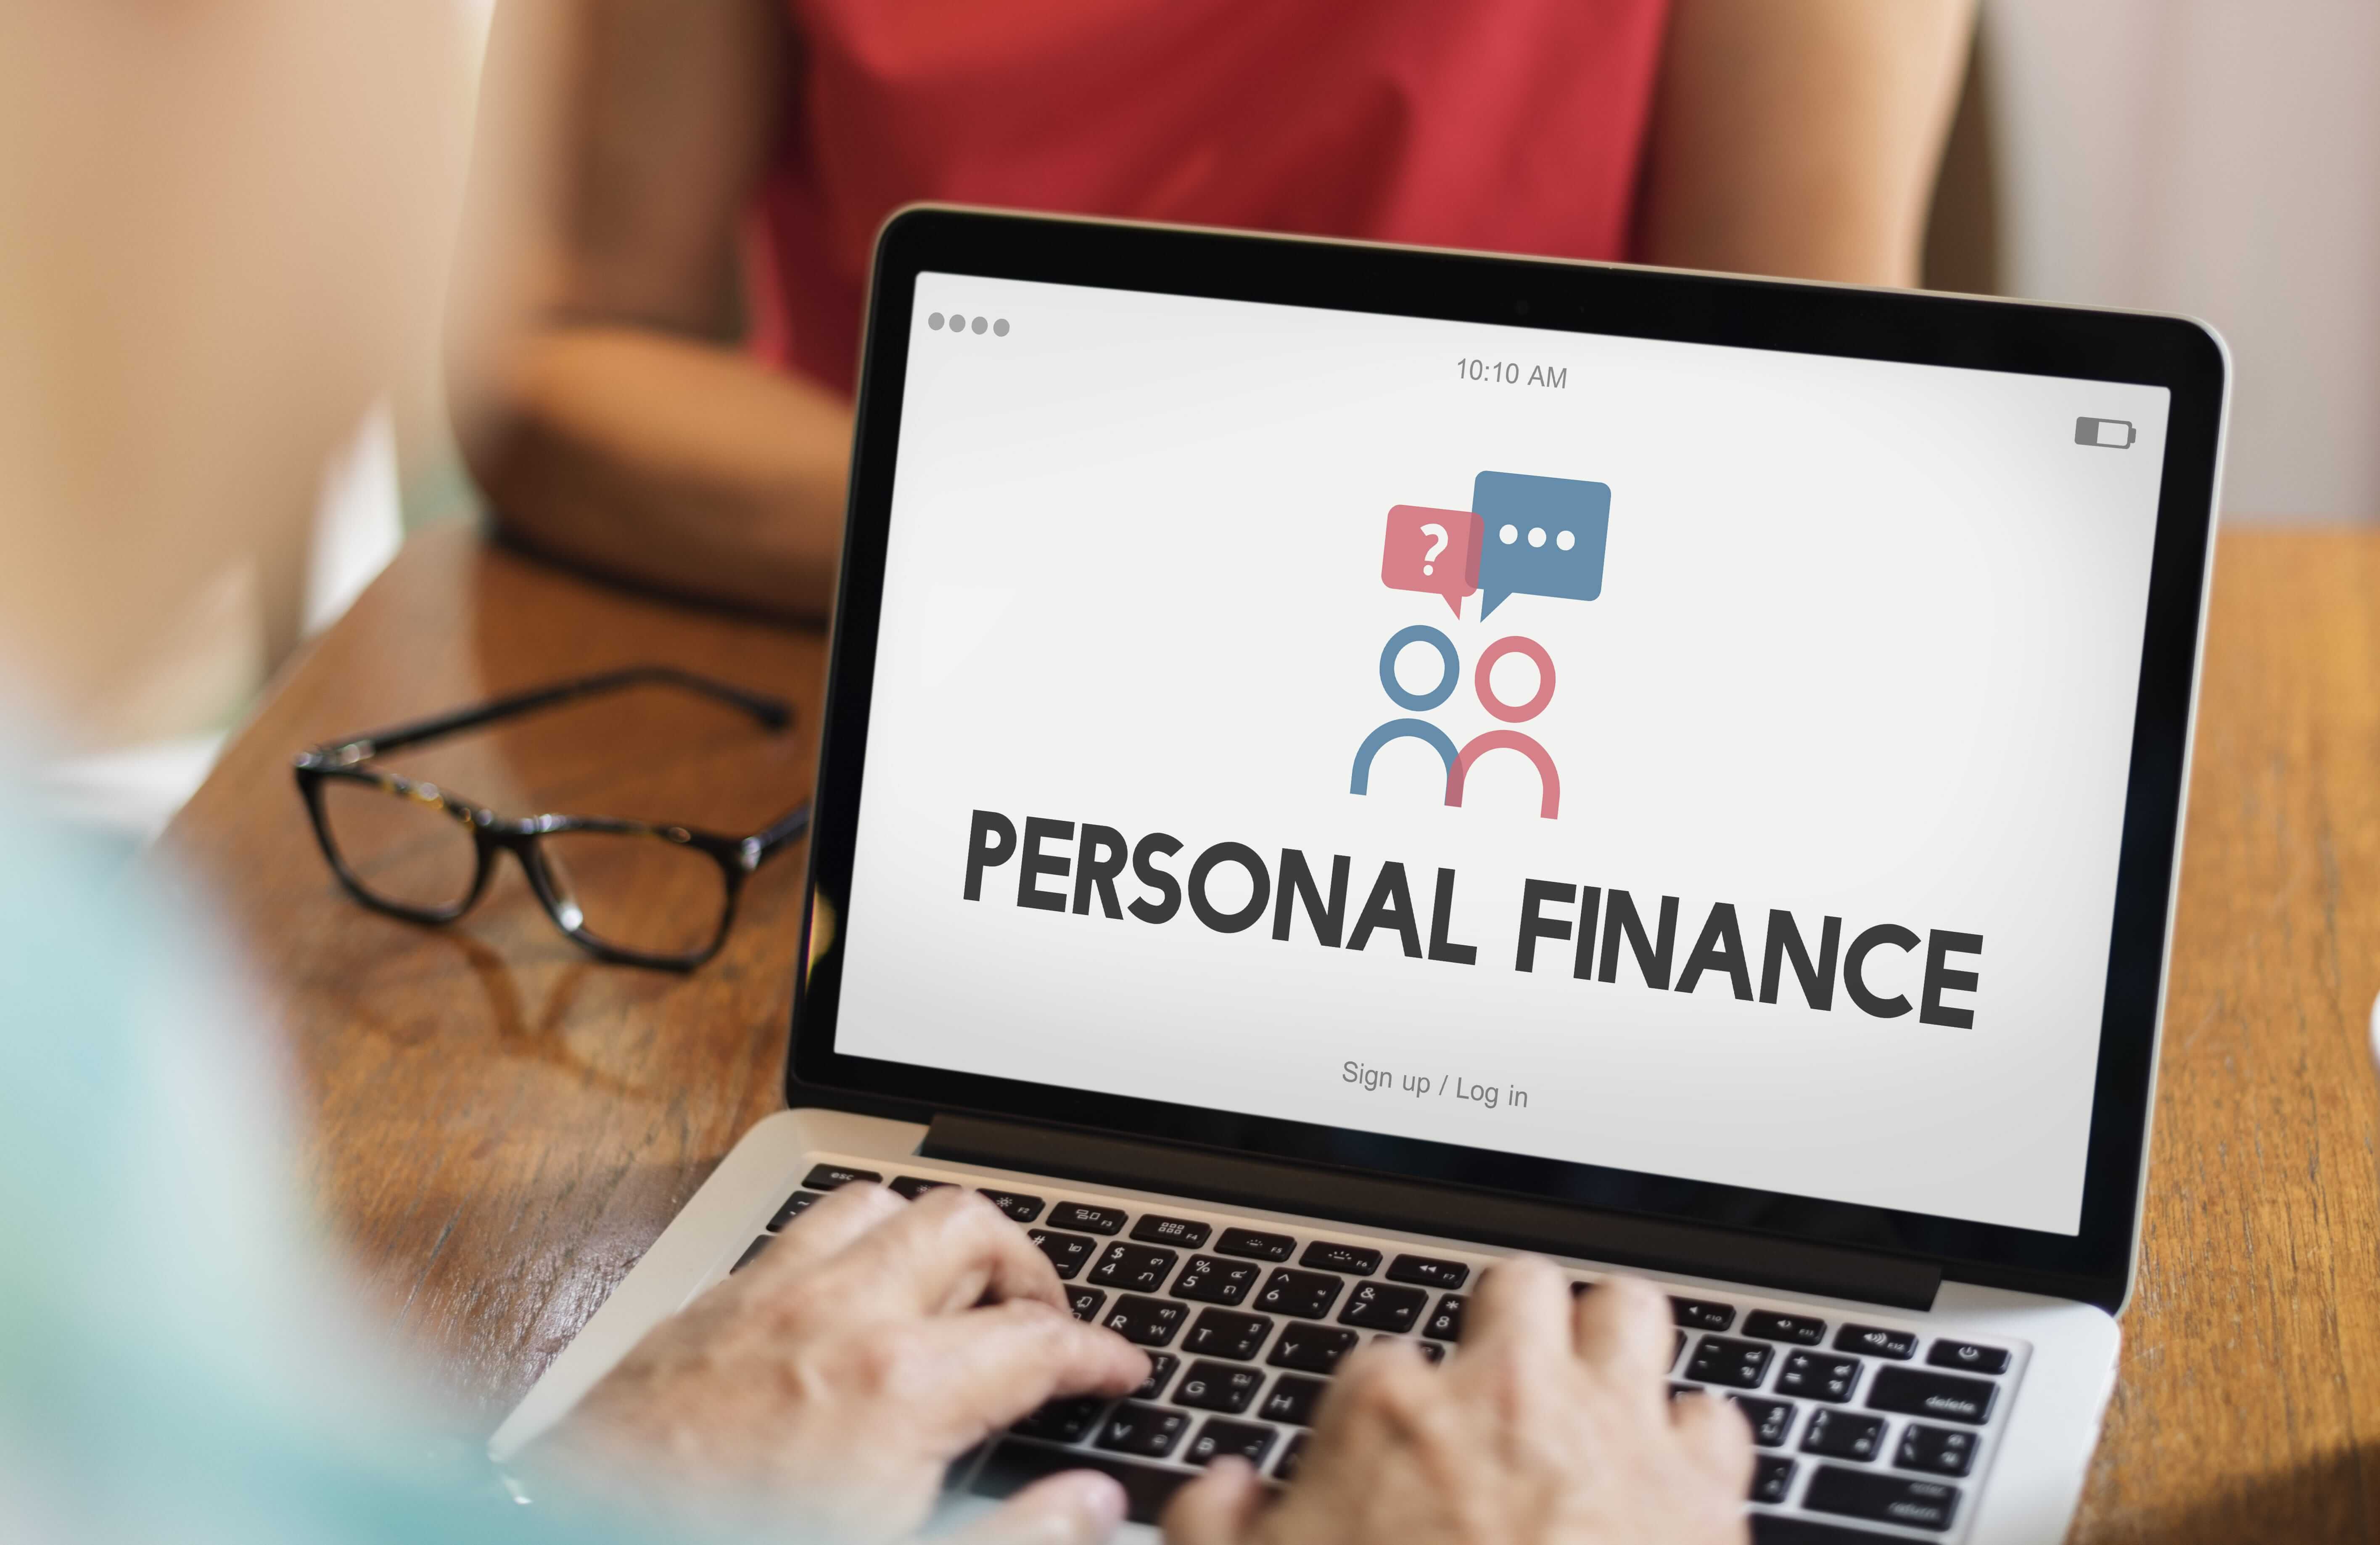 Banner image of a laptop with personal finance written on the screen.